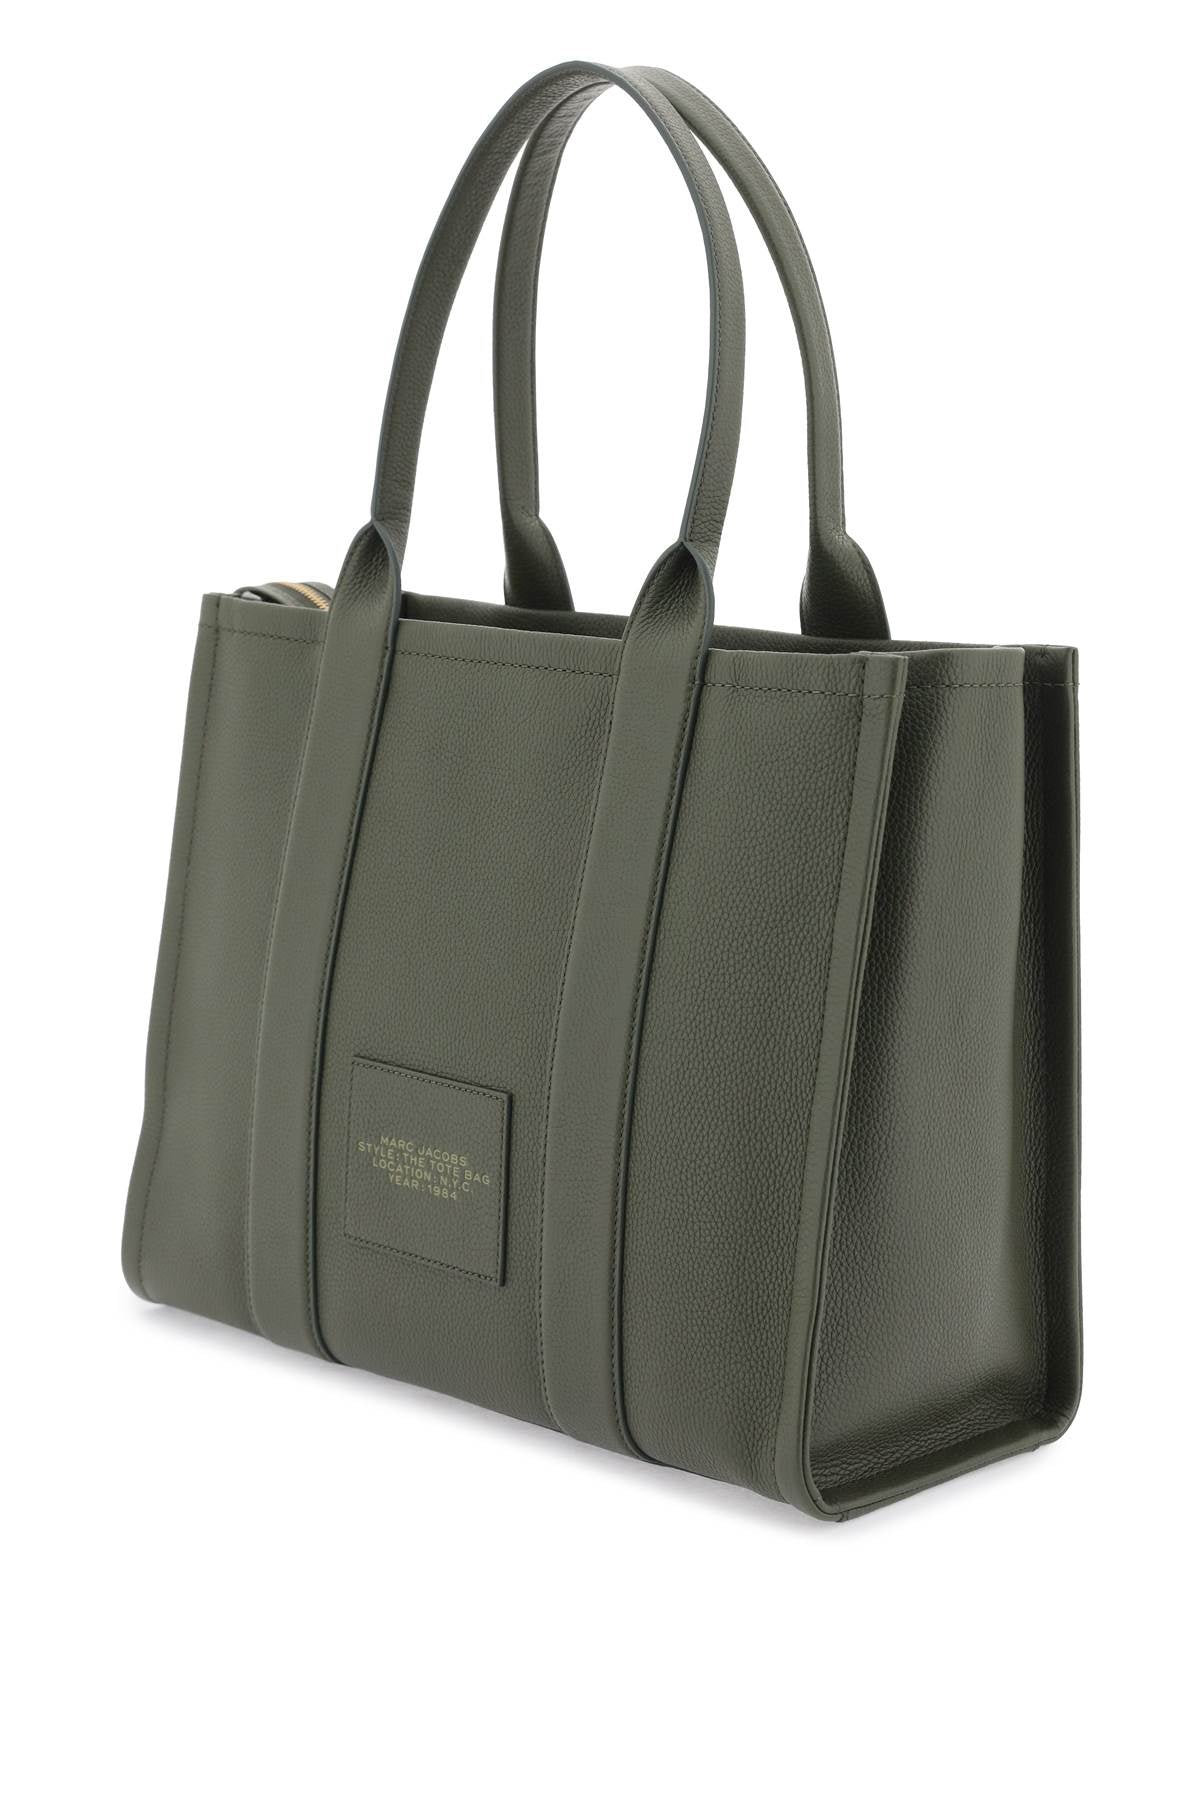 Marc jacobs the leather large tote bag-1